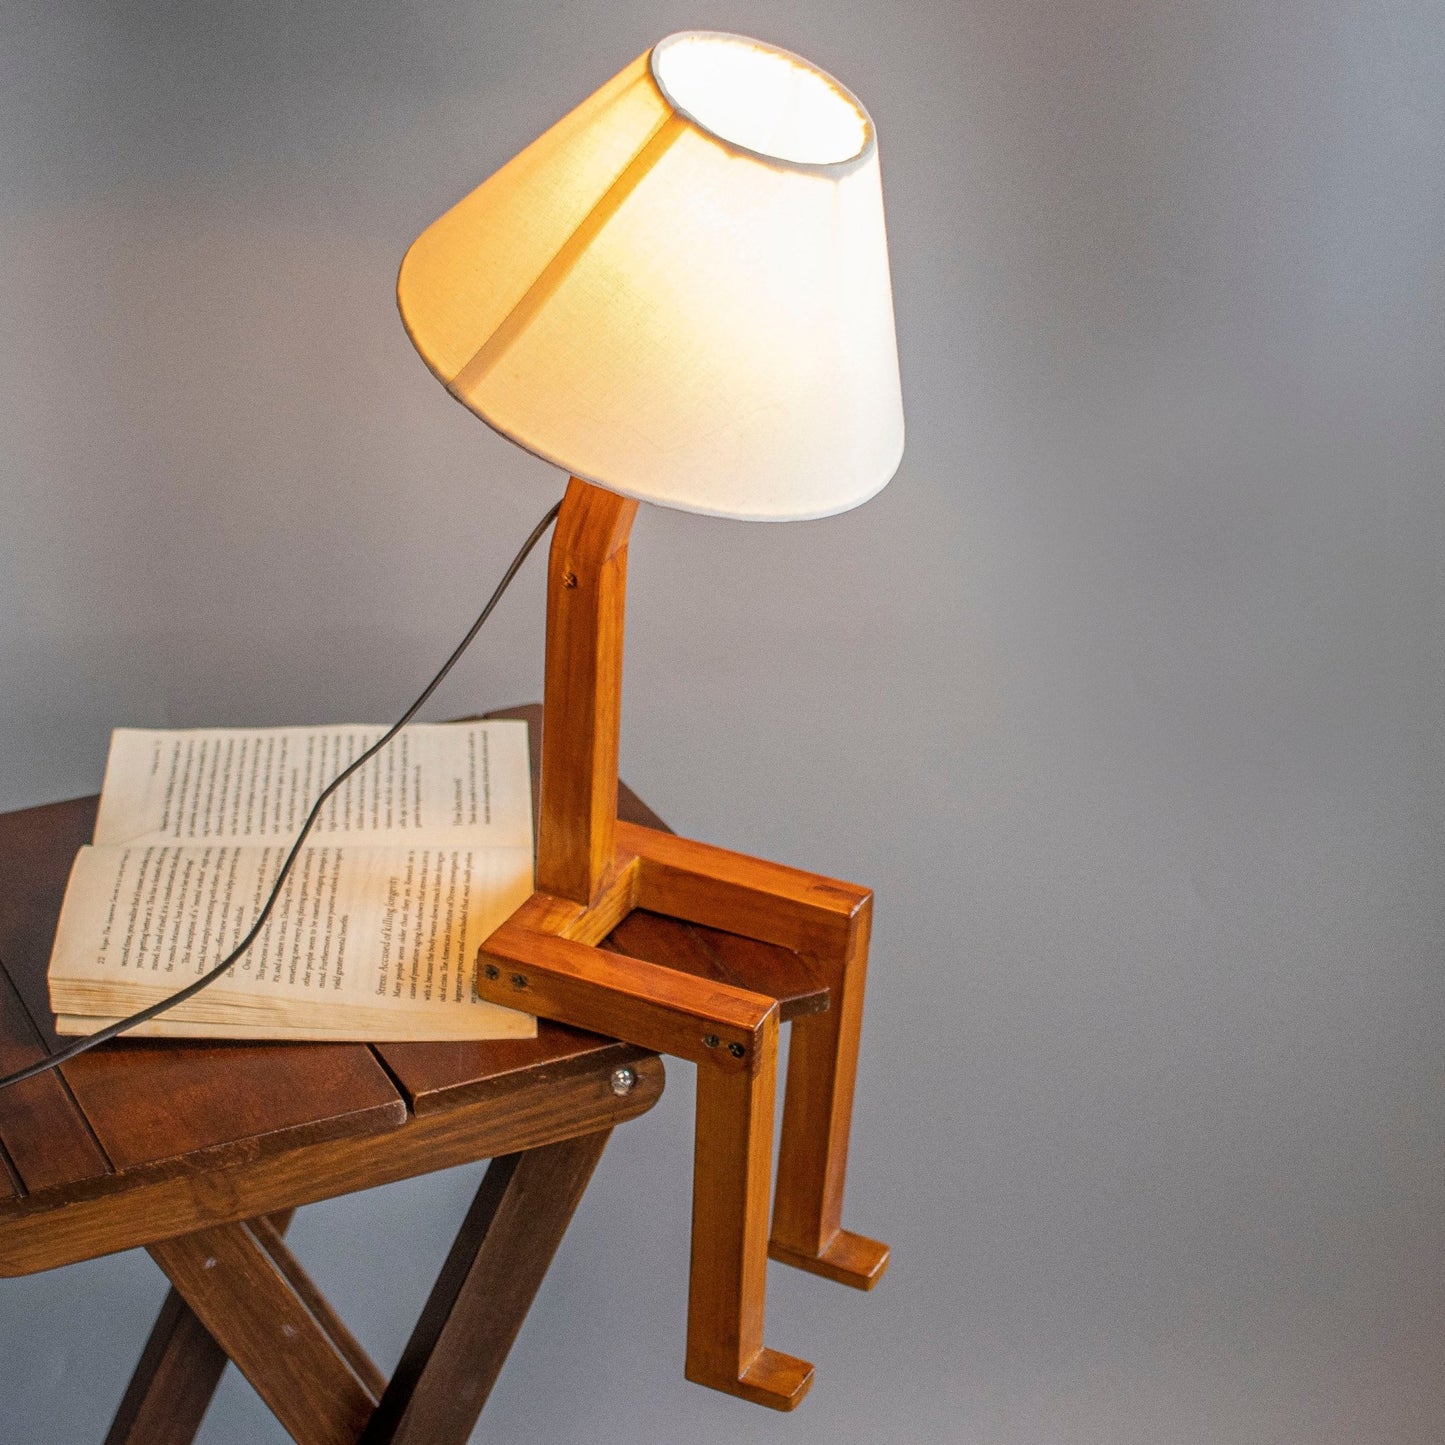 The RoboMan : Wooden Table Lamps - Ebony WoodcraftsLampshades